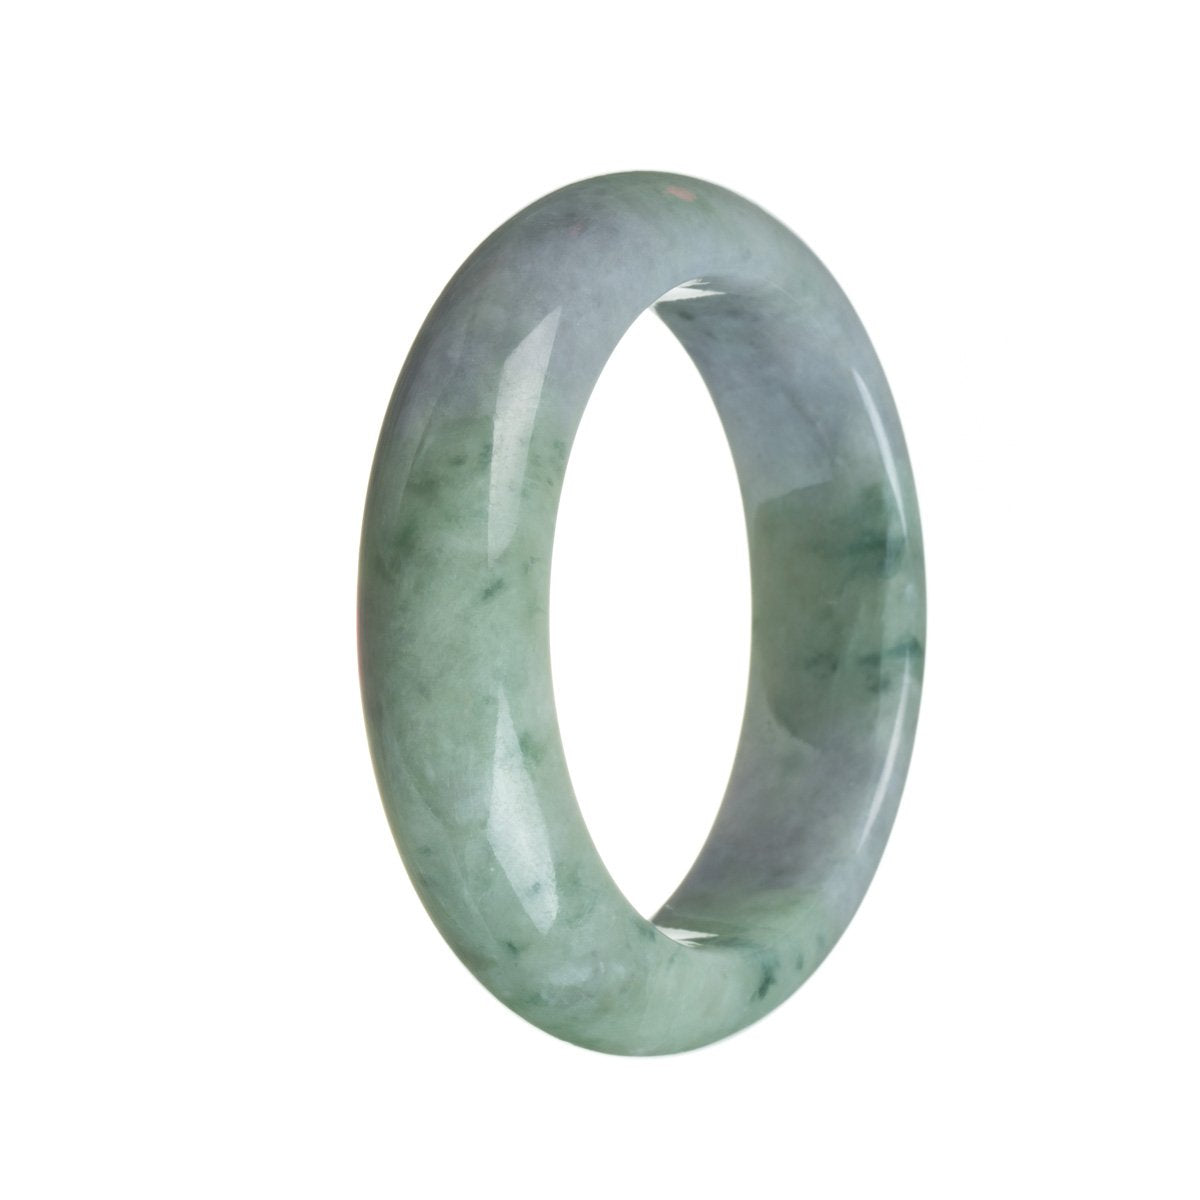 A half moon-shaped bangle made of real untreated lavender and green jade stones, from MAYS GEMS.